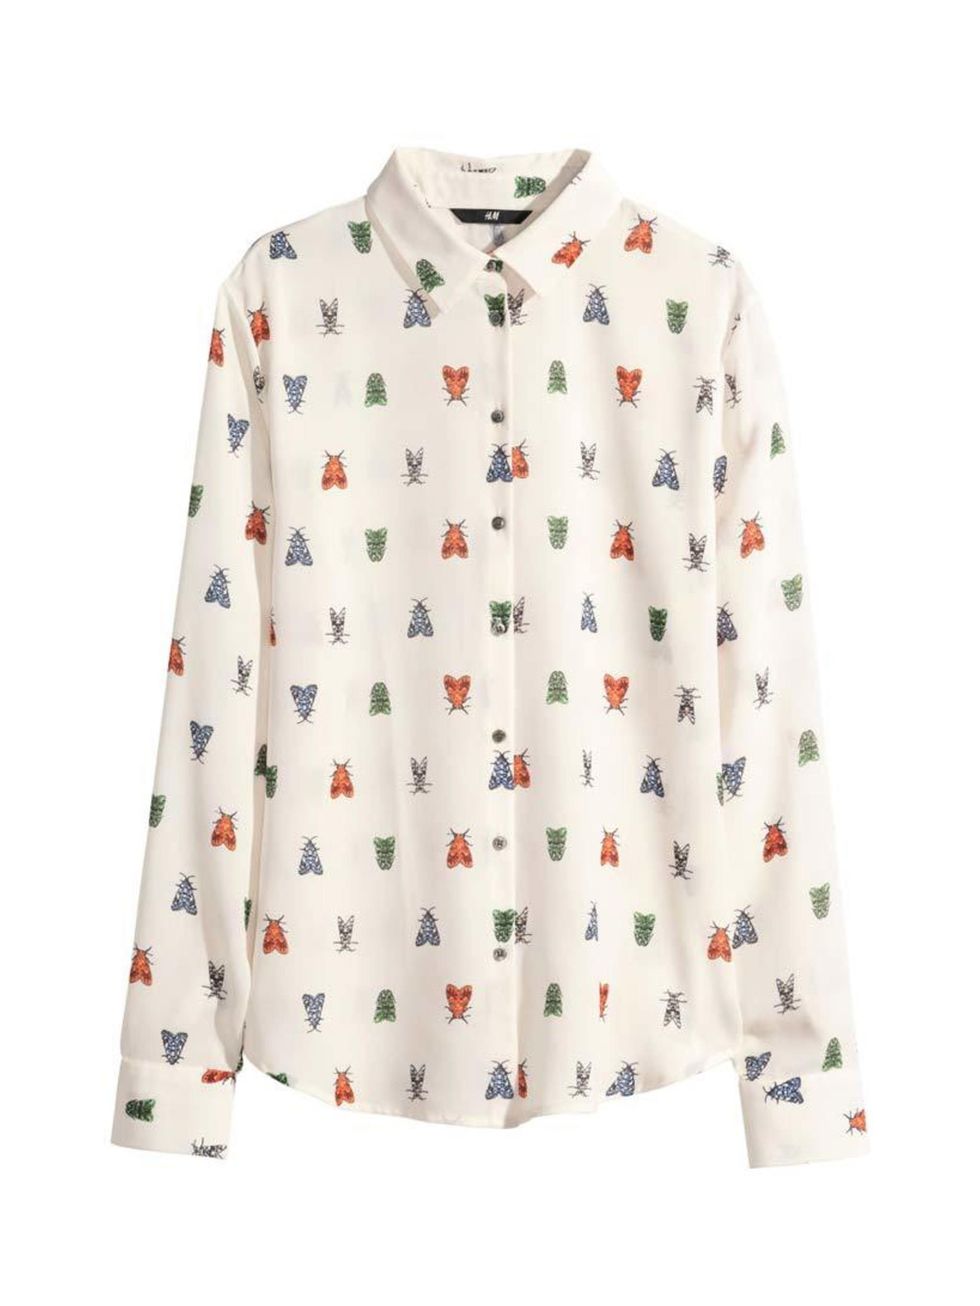 <p>Head of Editorial Business Management Debbie Morgan couldn't resist this workwear classic with a twist.</p>

<p><a href="http://www.hm.com/gb/product/48748?article=48748-A" target="_blank">H&M</a> shirt, £14.99</p>